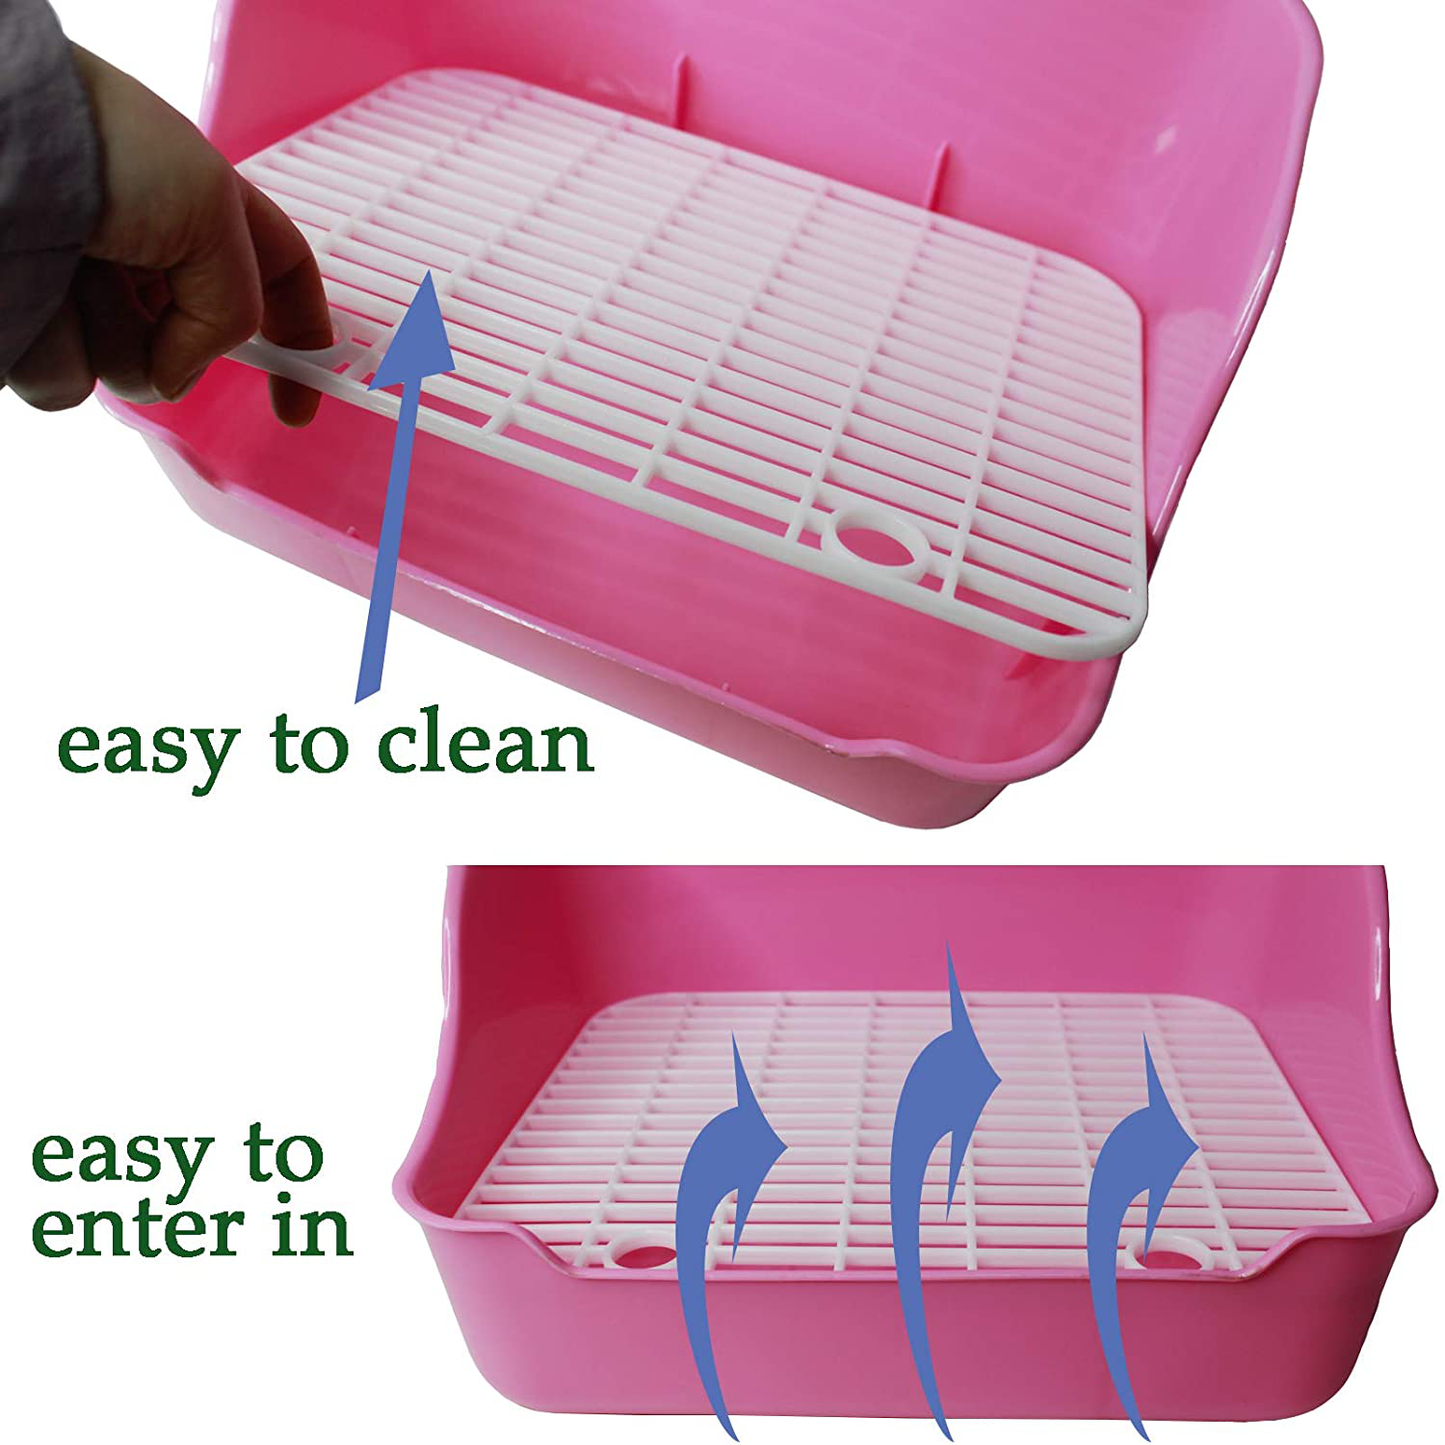 Small Animal Rabbit Litter Toilet, Plastic Square Cage Box, Corner Pan with Grate, Potty Training for Bunny, Guinea Pigs, Chinchilla, Ferret, Galesaur, Hamster Animals & Pet Supplies > Pet Supplies > Small Animal Supplies > Small Animal Bedding Hamiledyi   